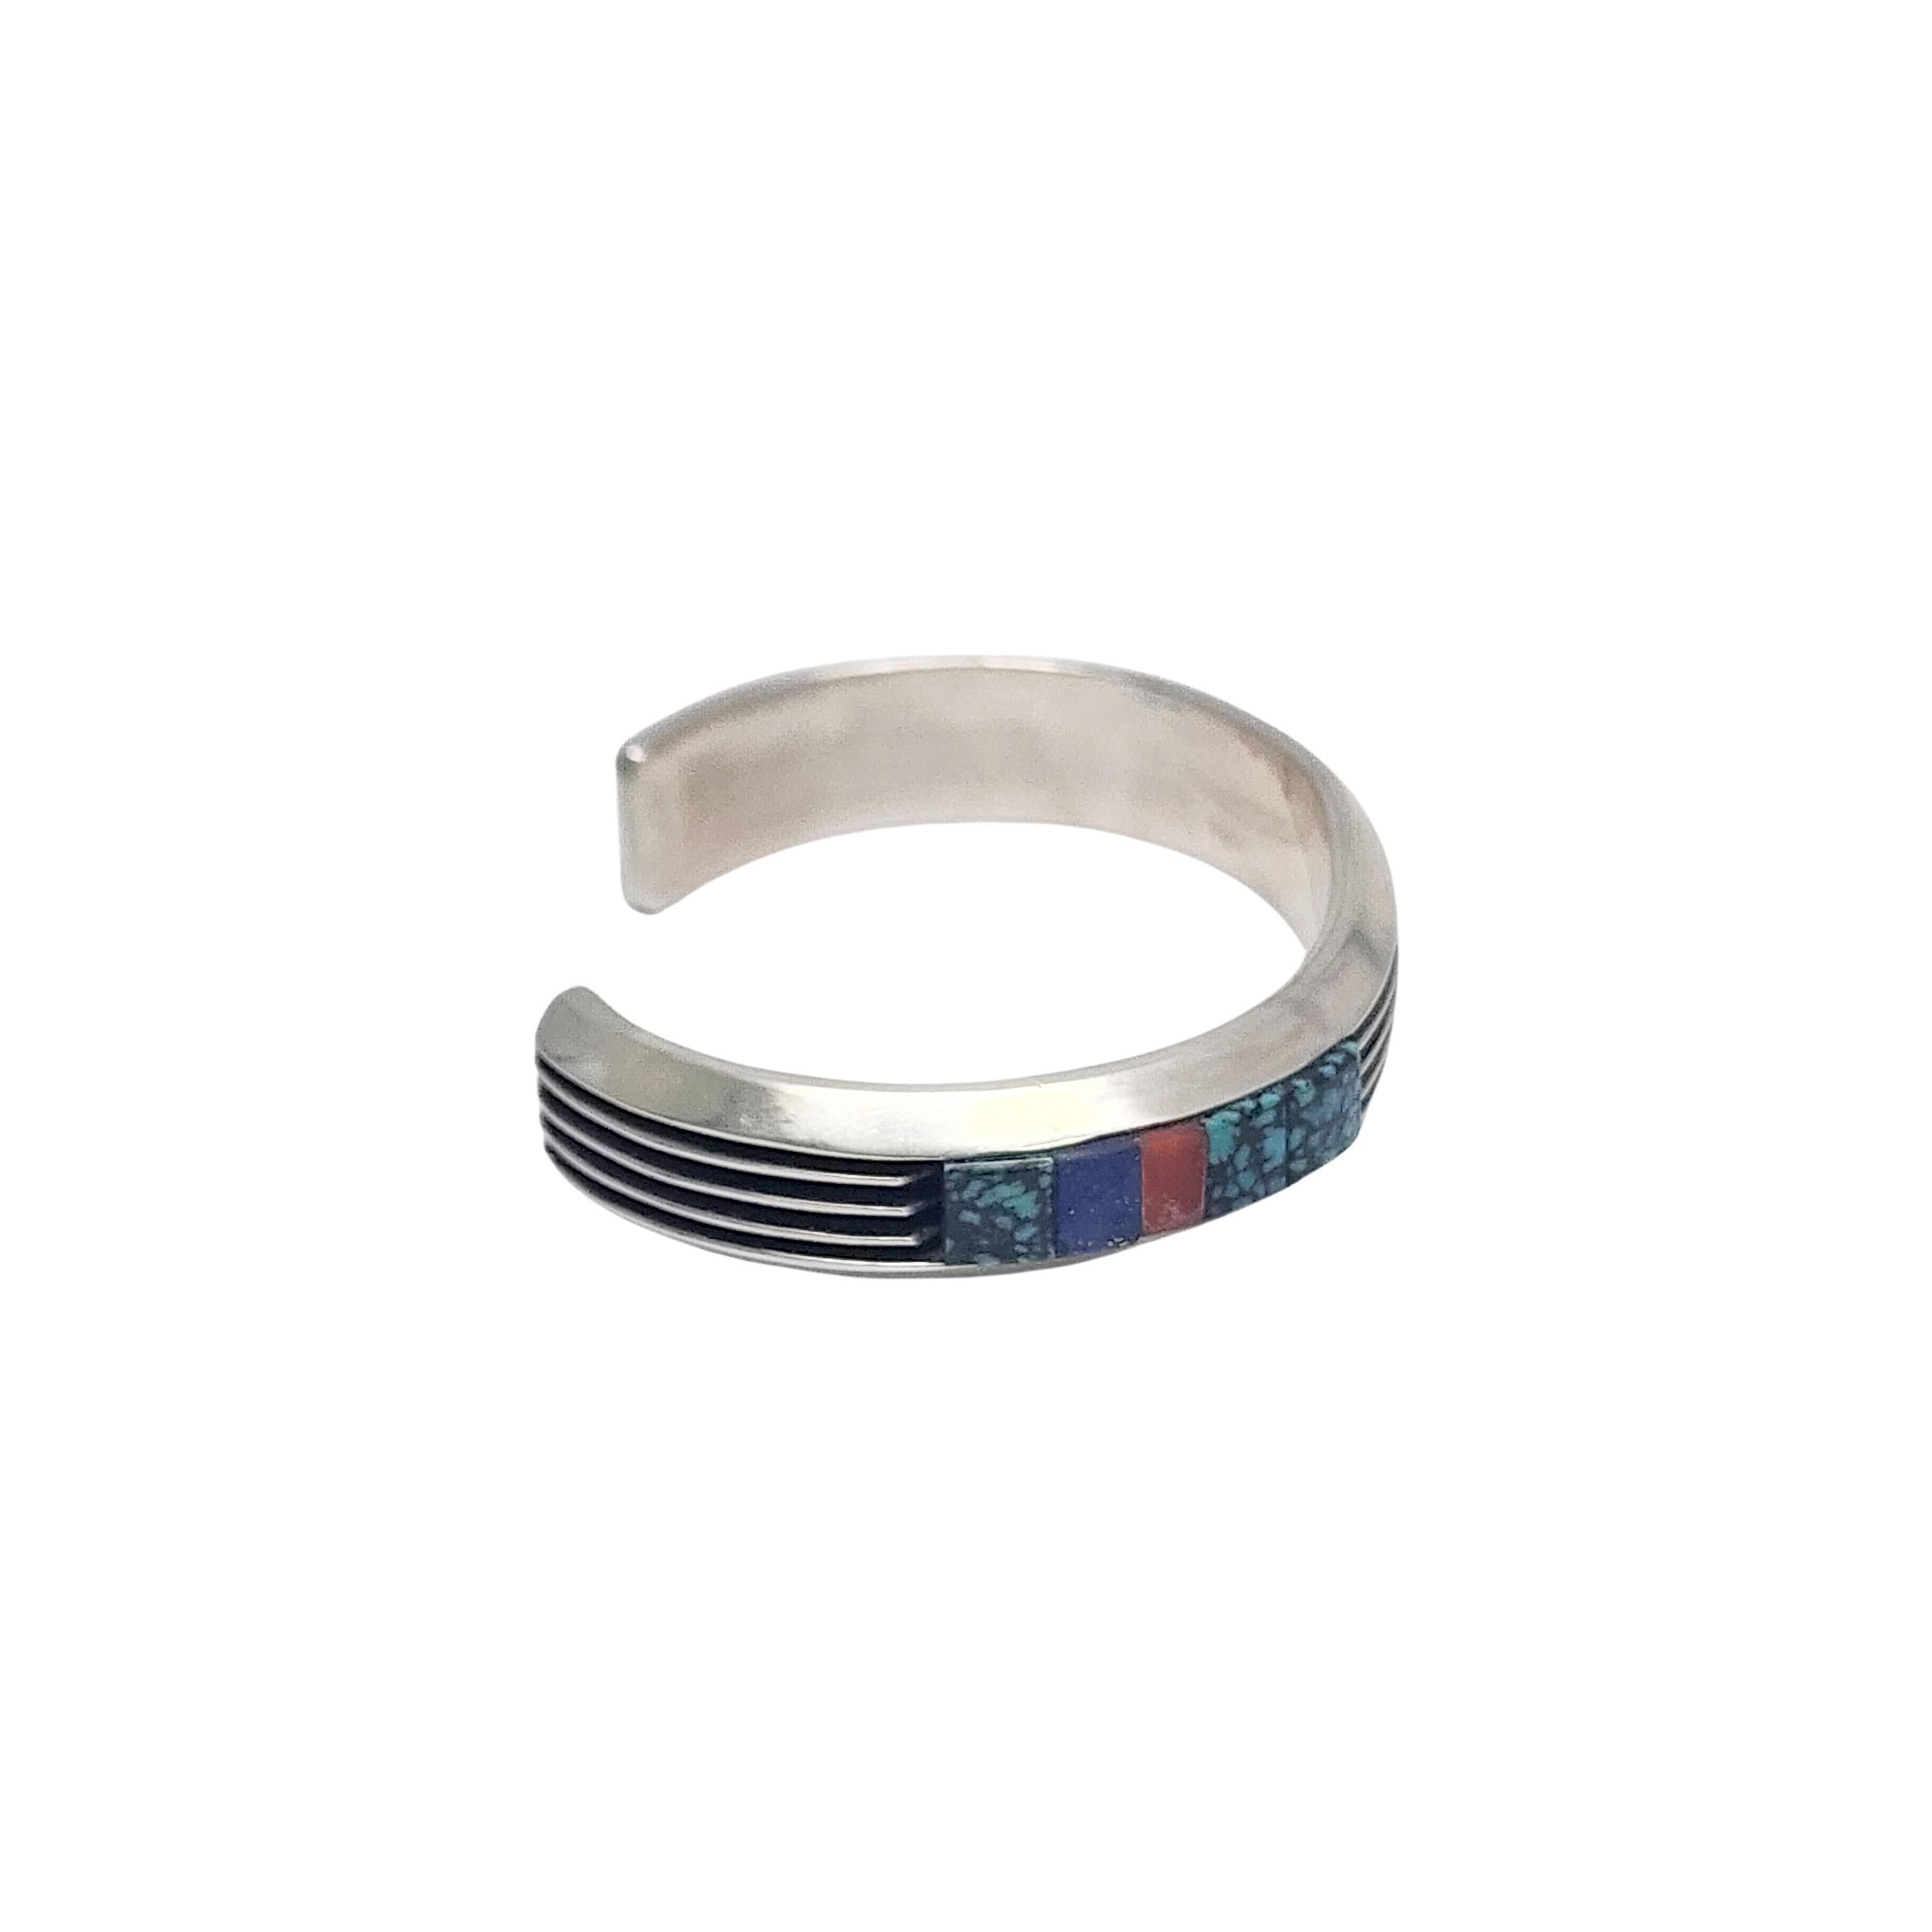 Sterling silver multi-stone cuff bracelet by Native American artisan Larry Begay.

Heavy cuff bracelet with etched line designs and off-set stones on each side that appear to be turquoise, lapis lazuli and carnelian.

Weighs approx 40.5g,